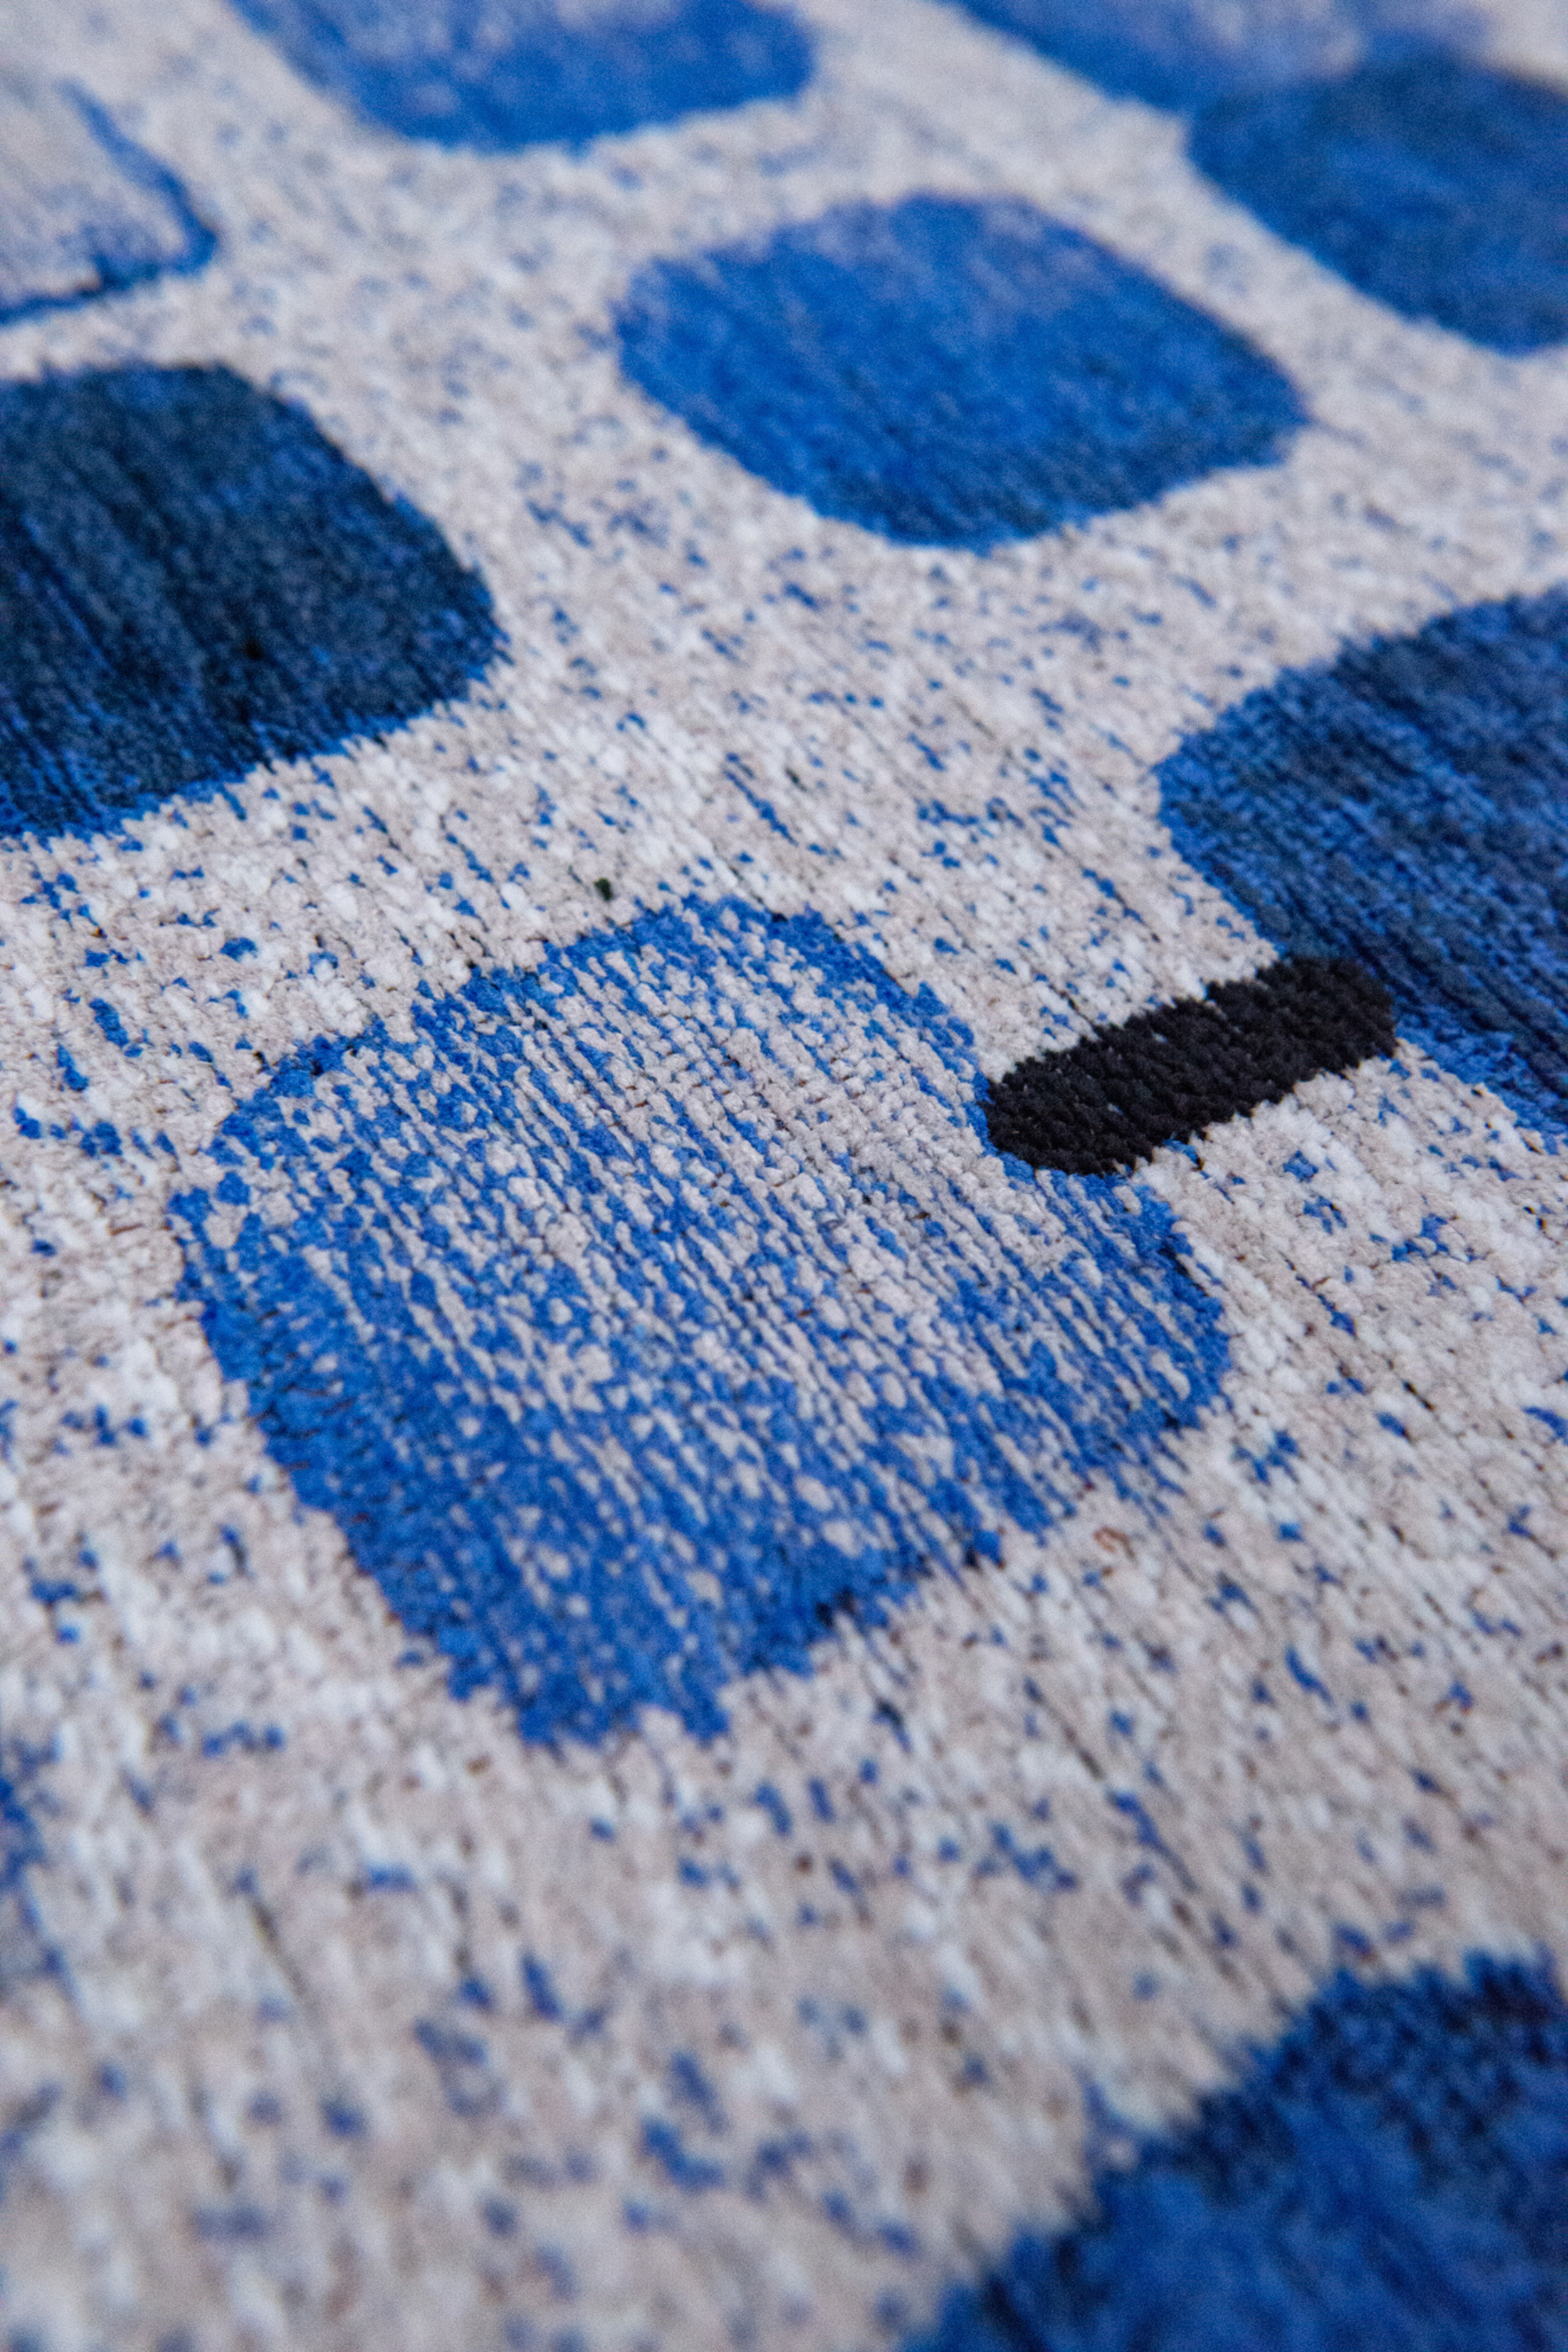 Modern blue circle rug with repeated peach motif pattern